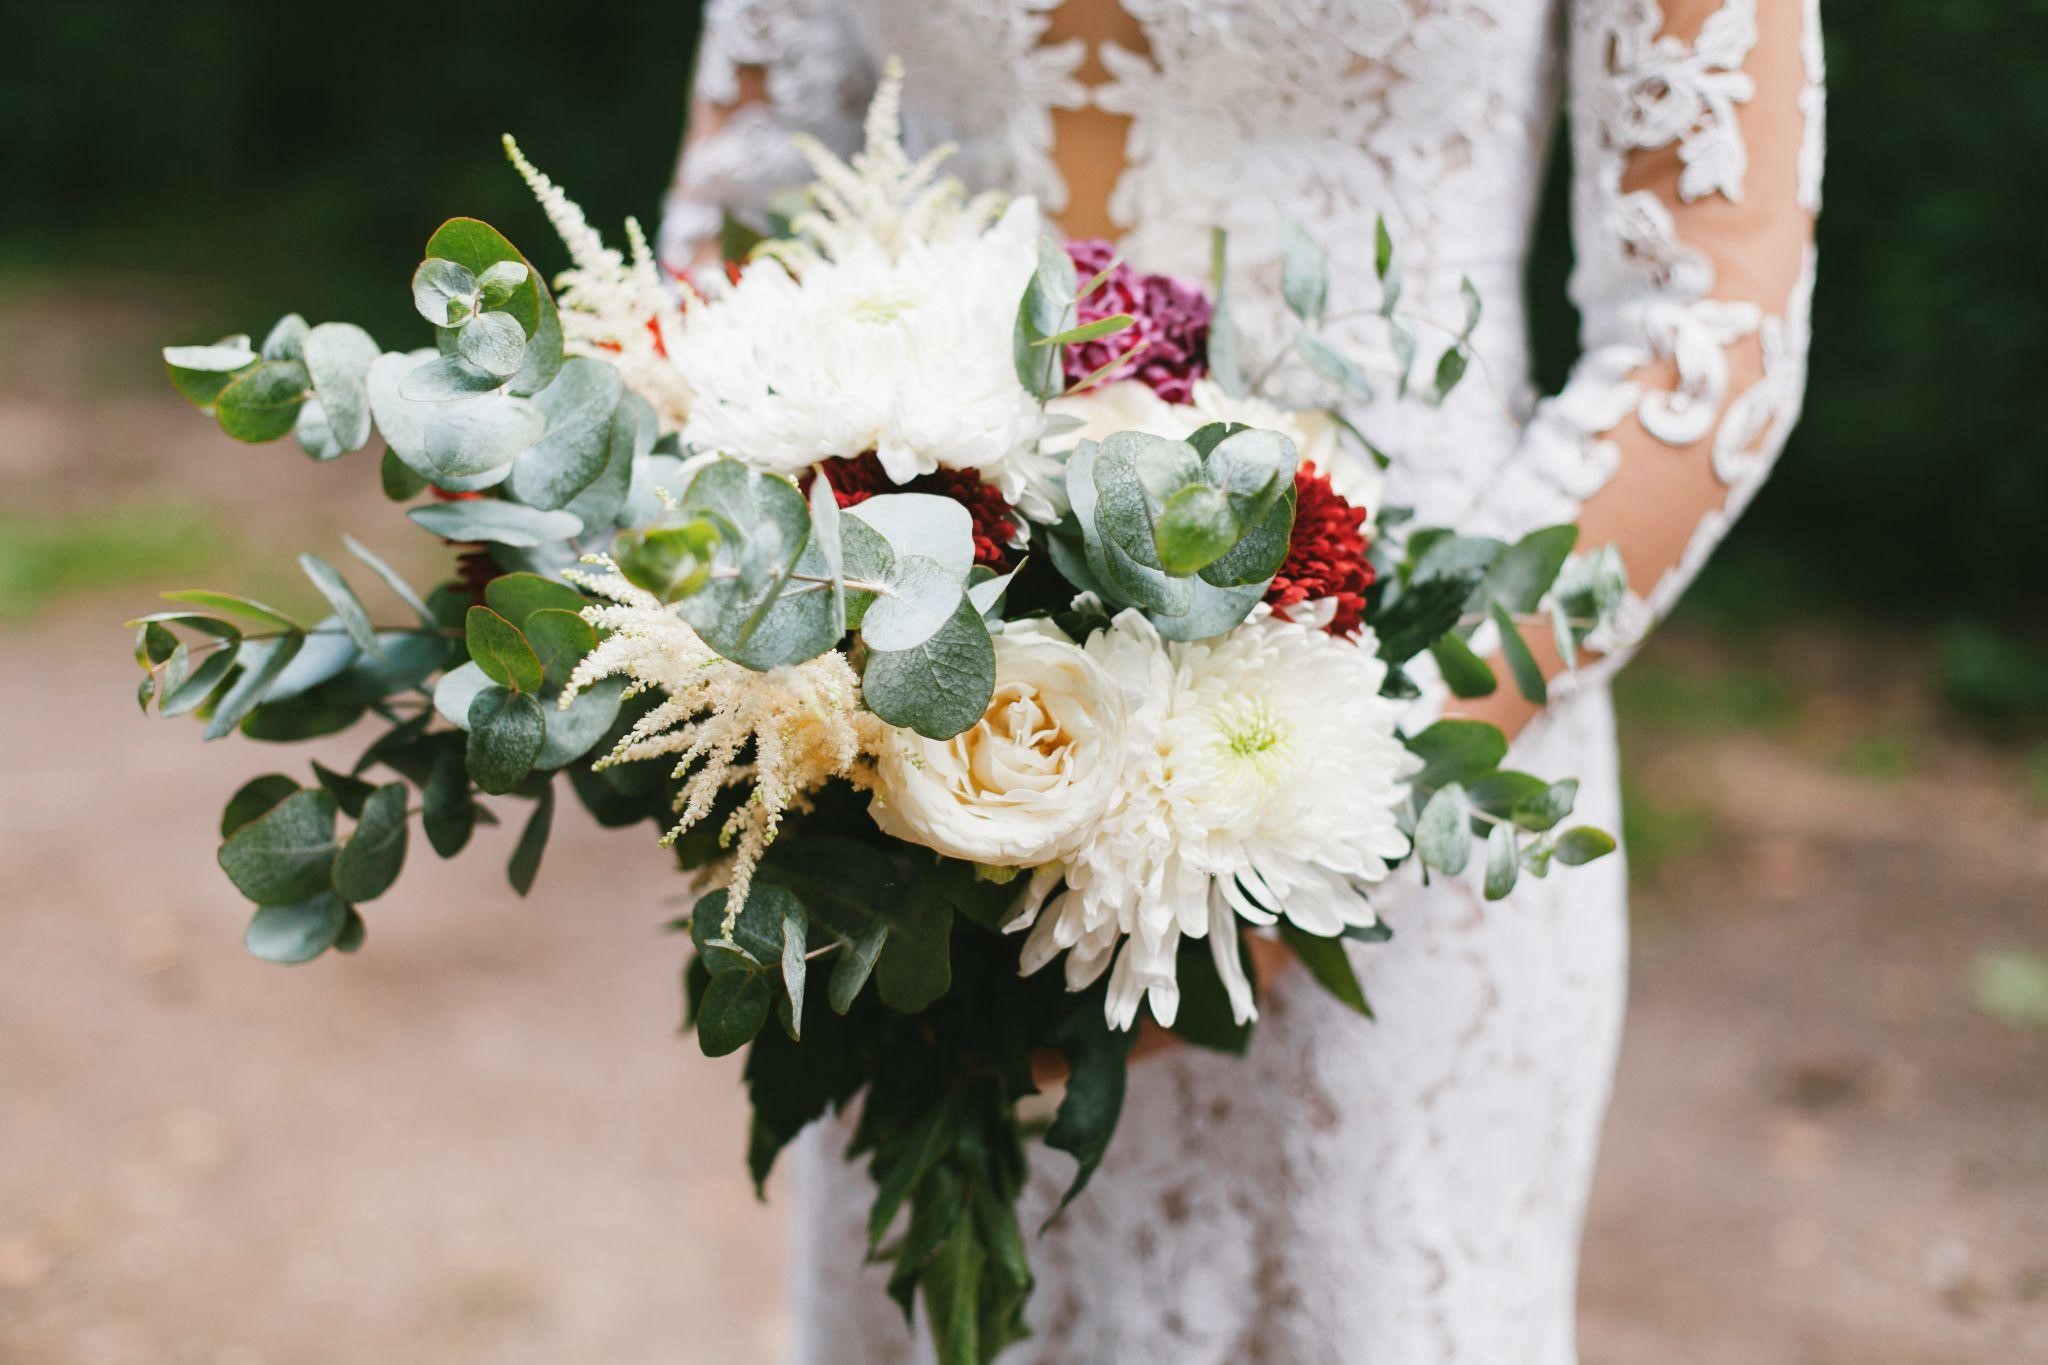 Fauxquet: A Timeless Alternative To Conventional Flowers.